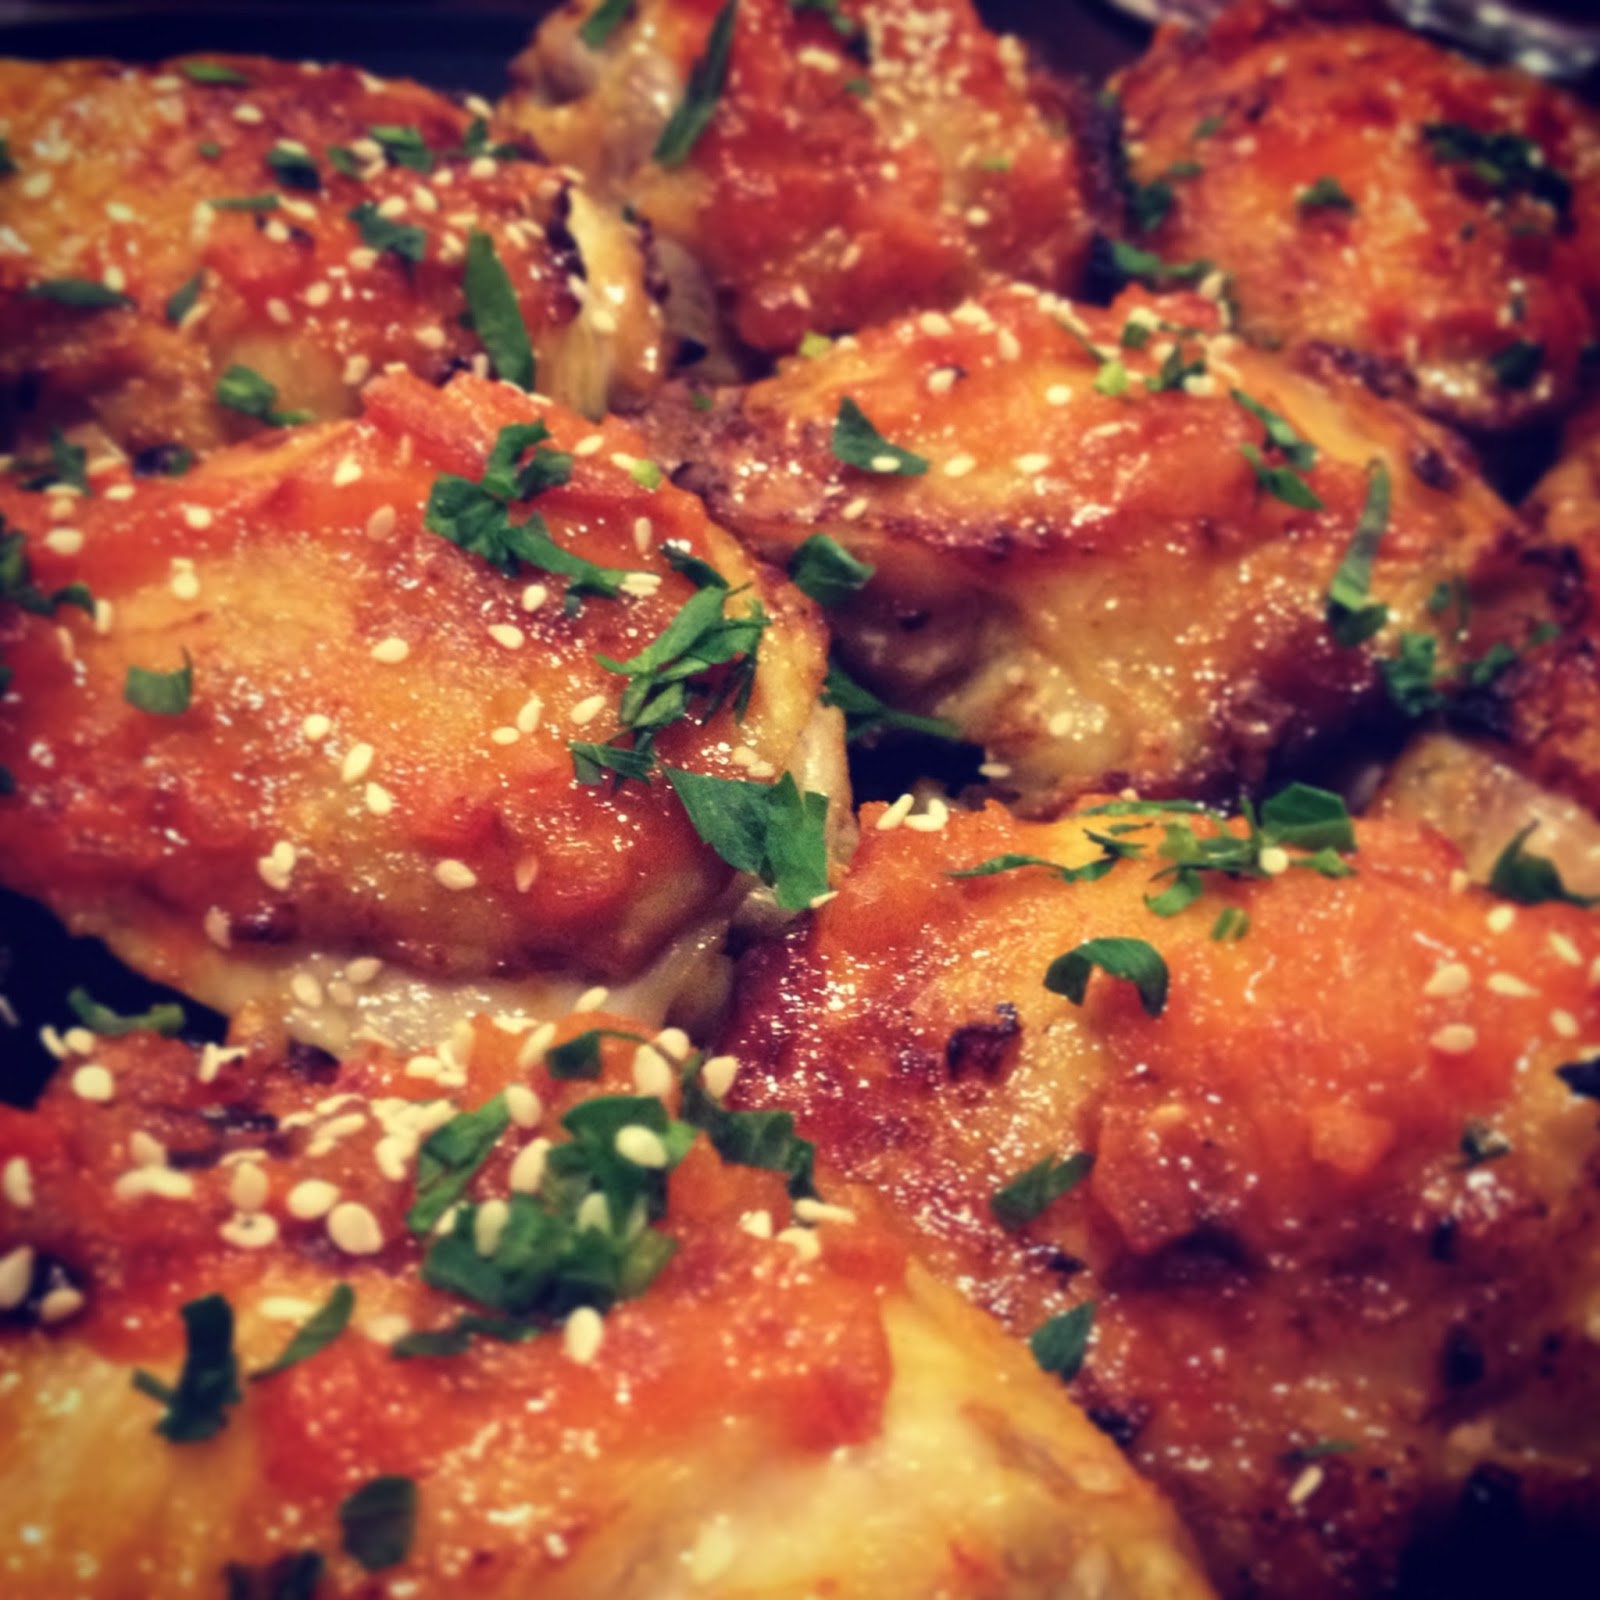 Heather takes the best pictures of food. http://instagram.com/p ...